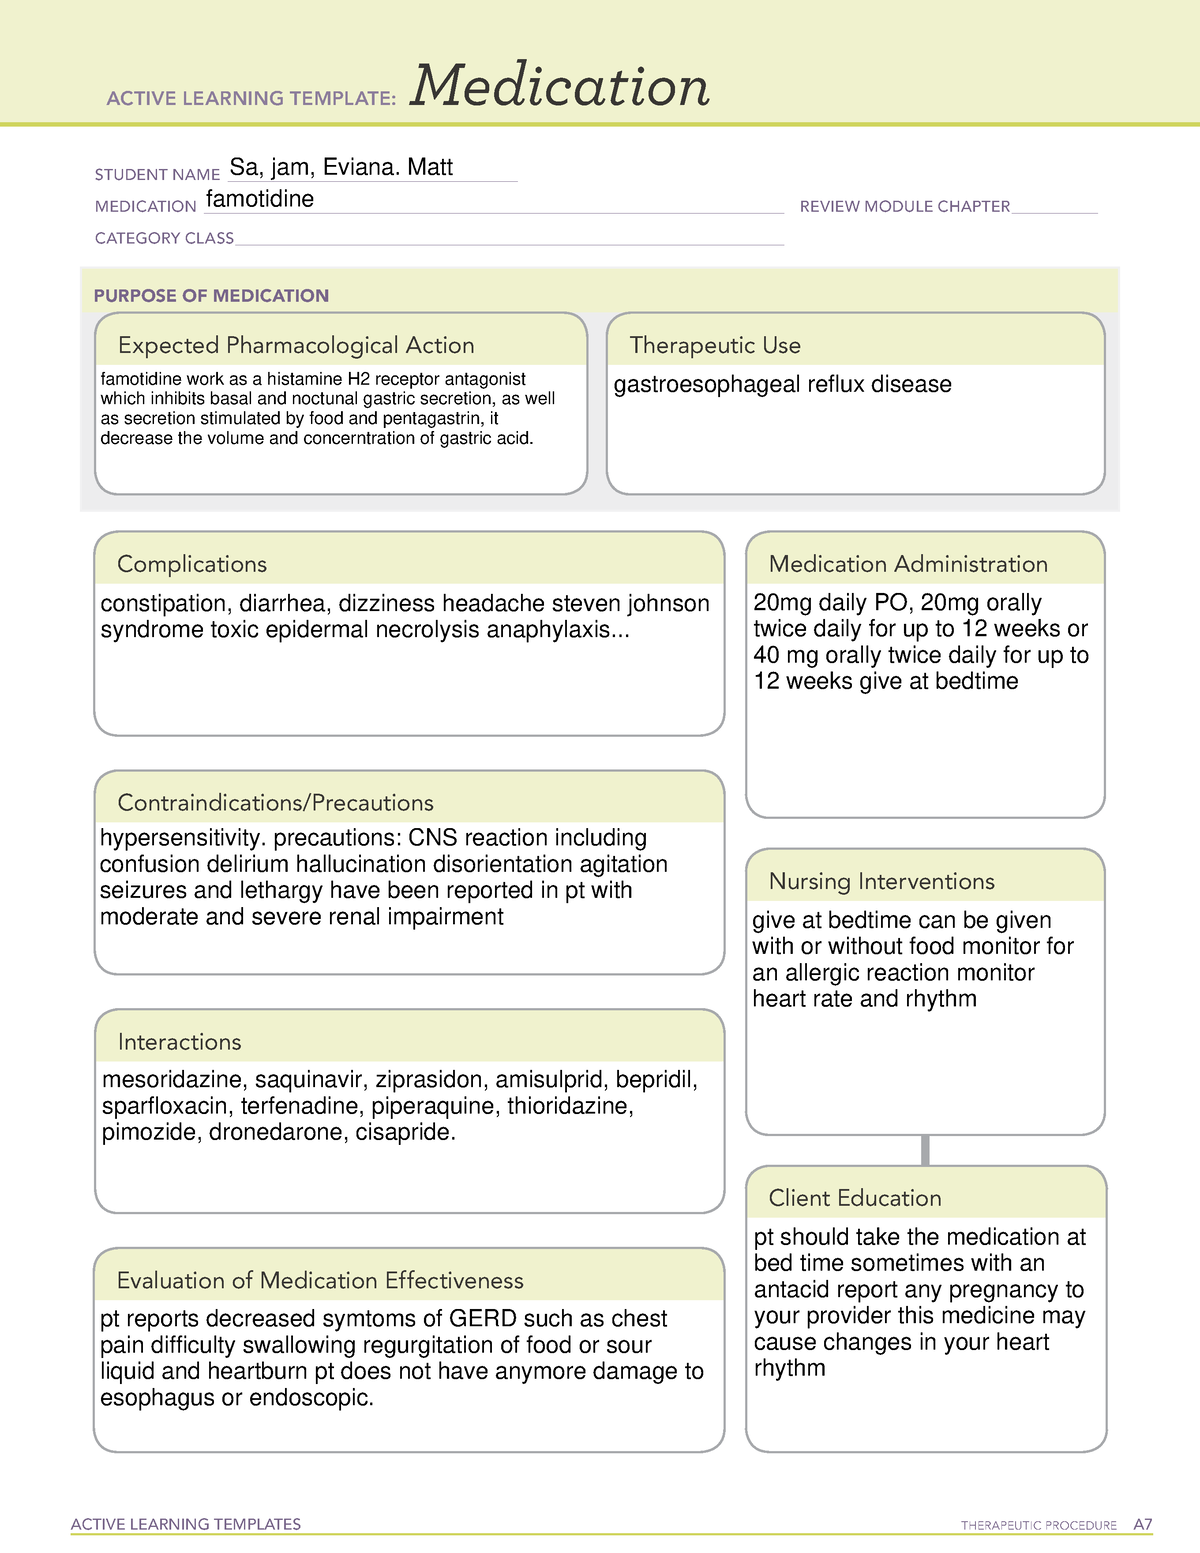 famotidine-revise-active-learning-templates-therapeutic-procedure-a-medication-student-name